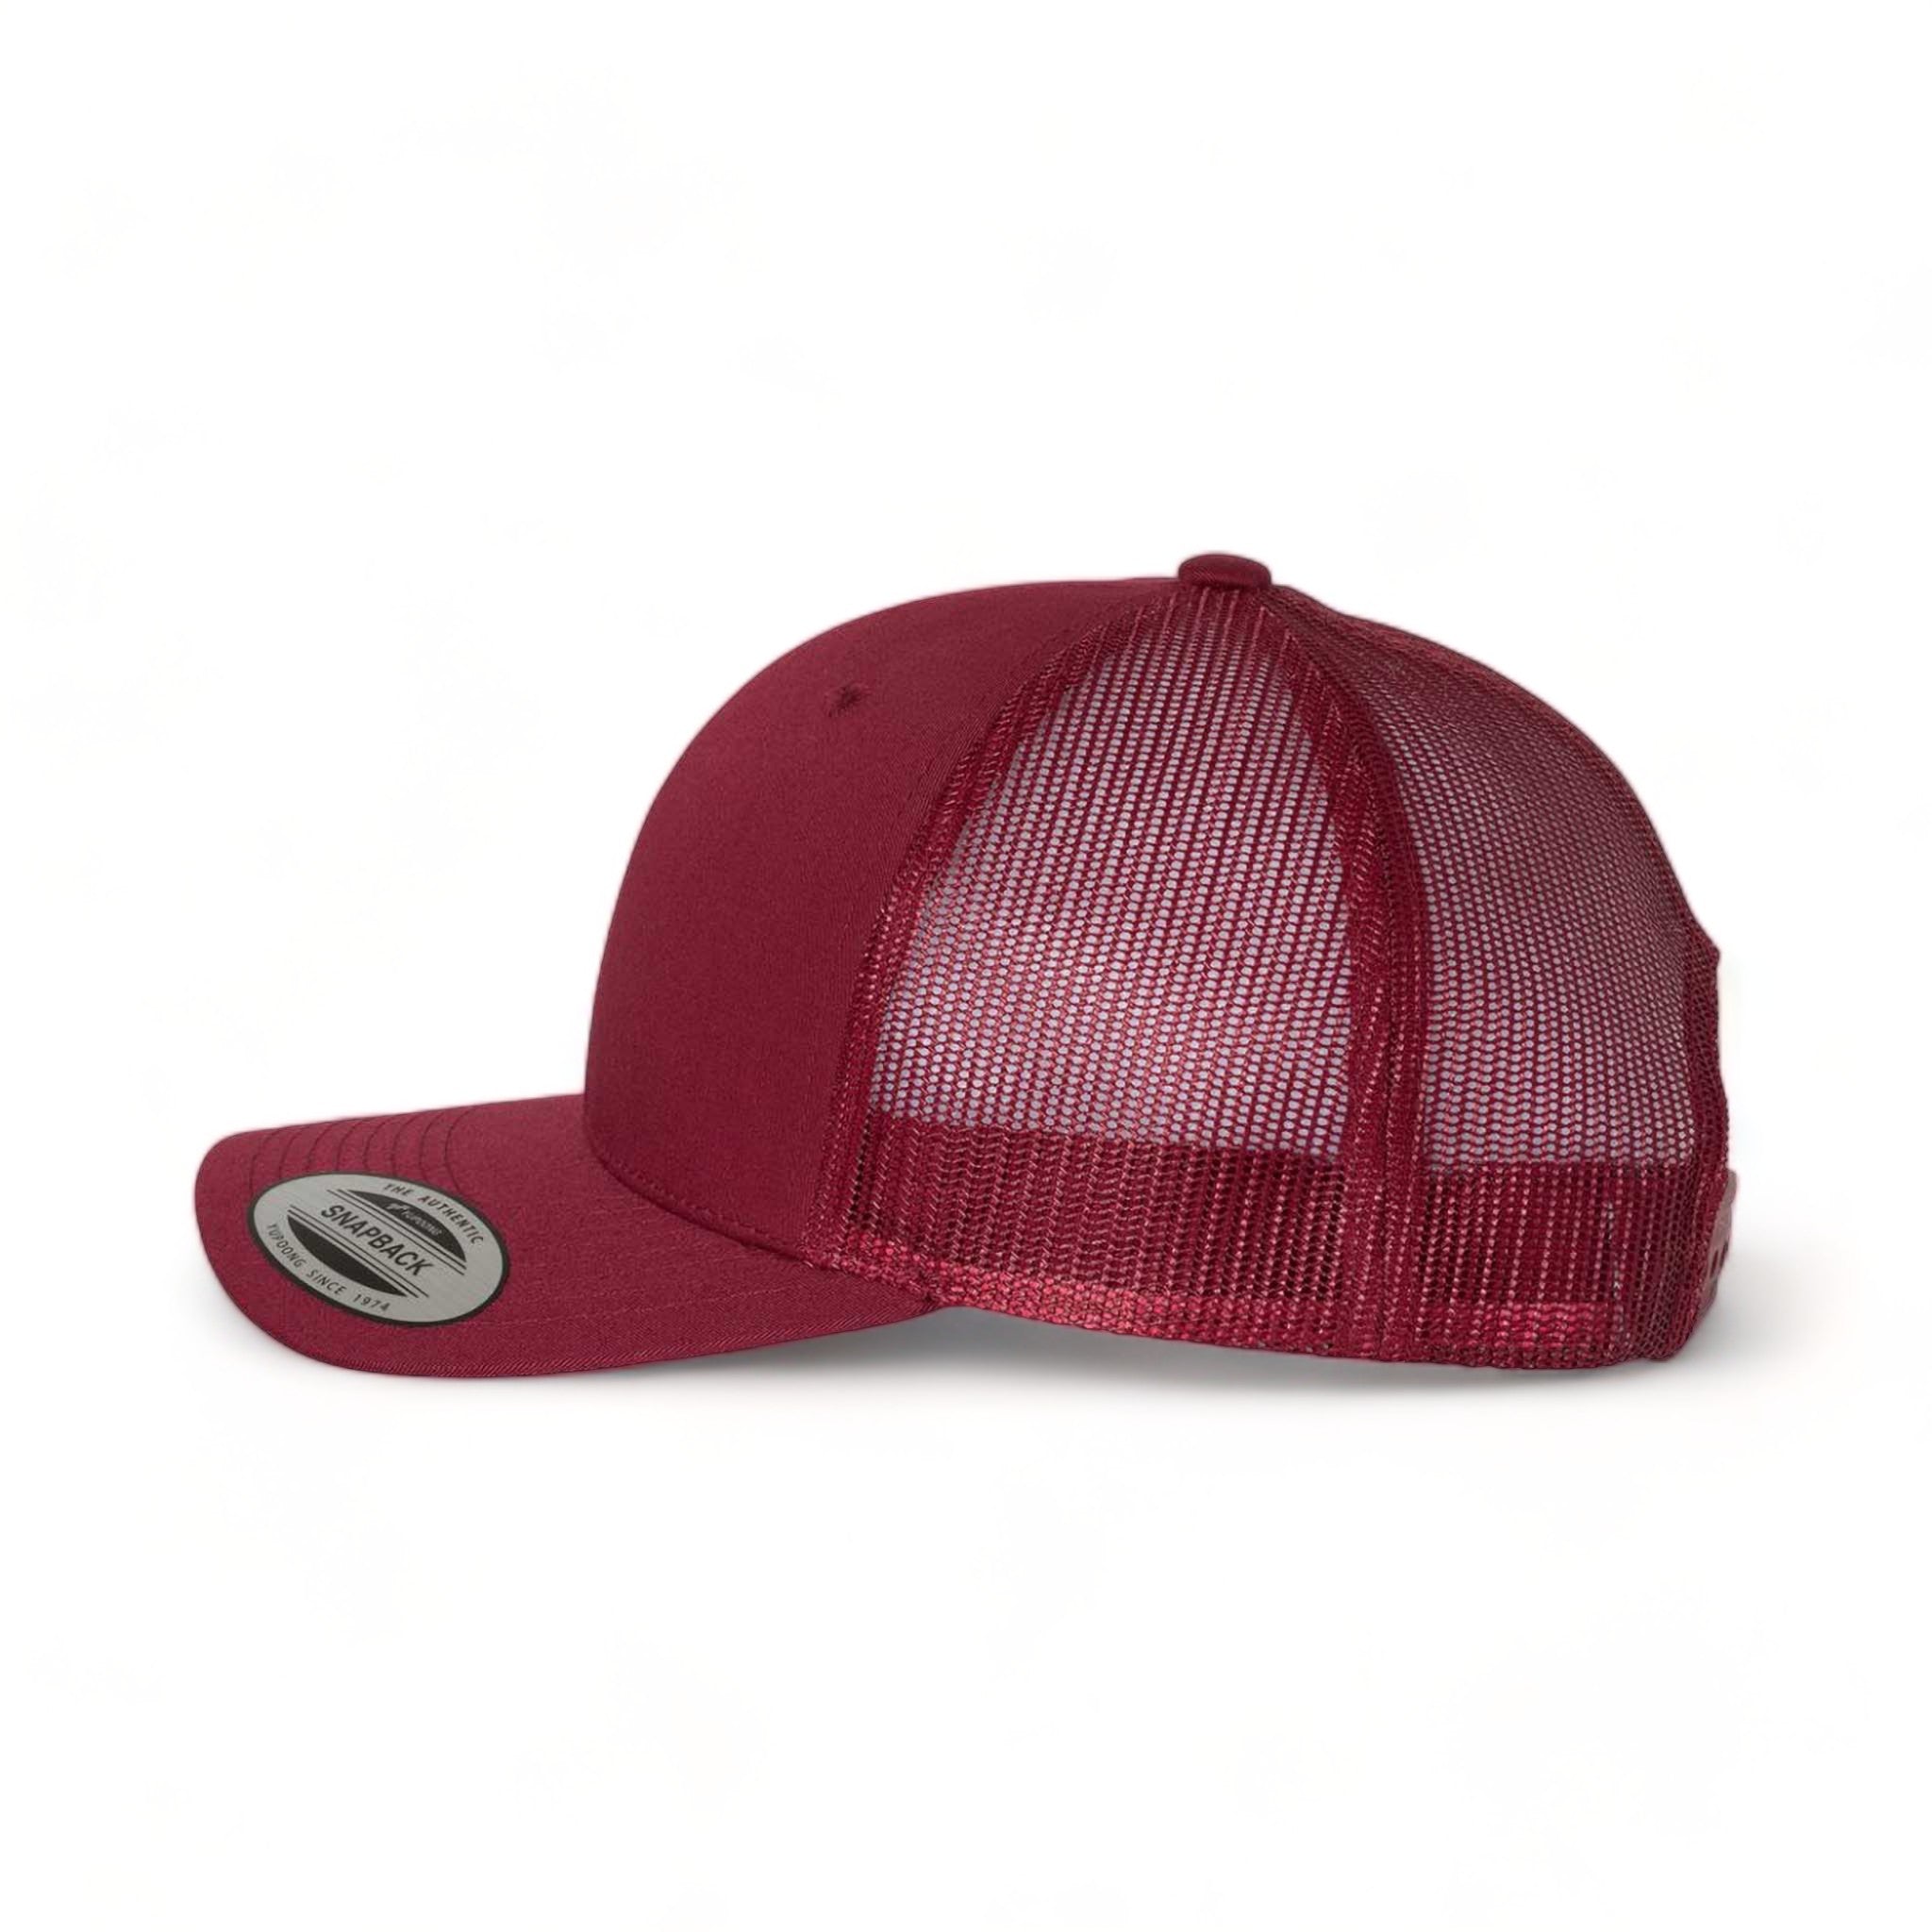 Side view of YP Classics 6606 custom hat in cranberry